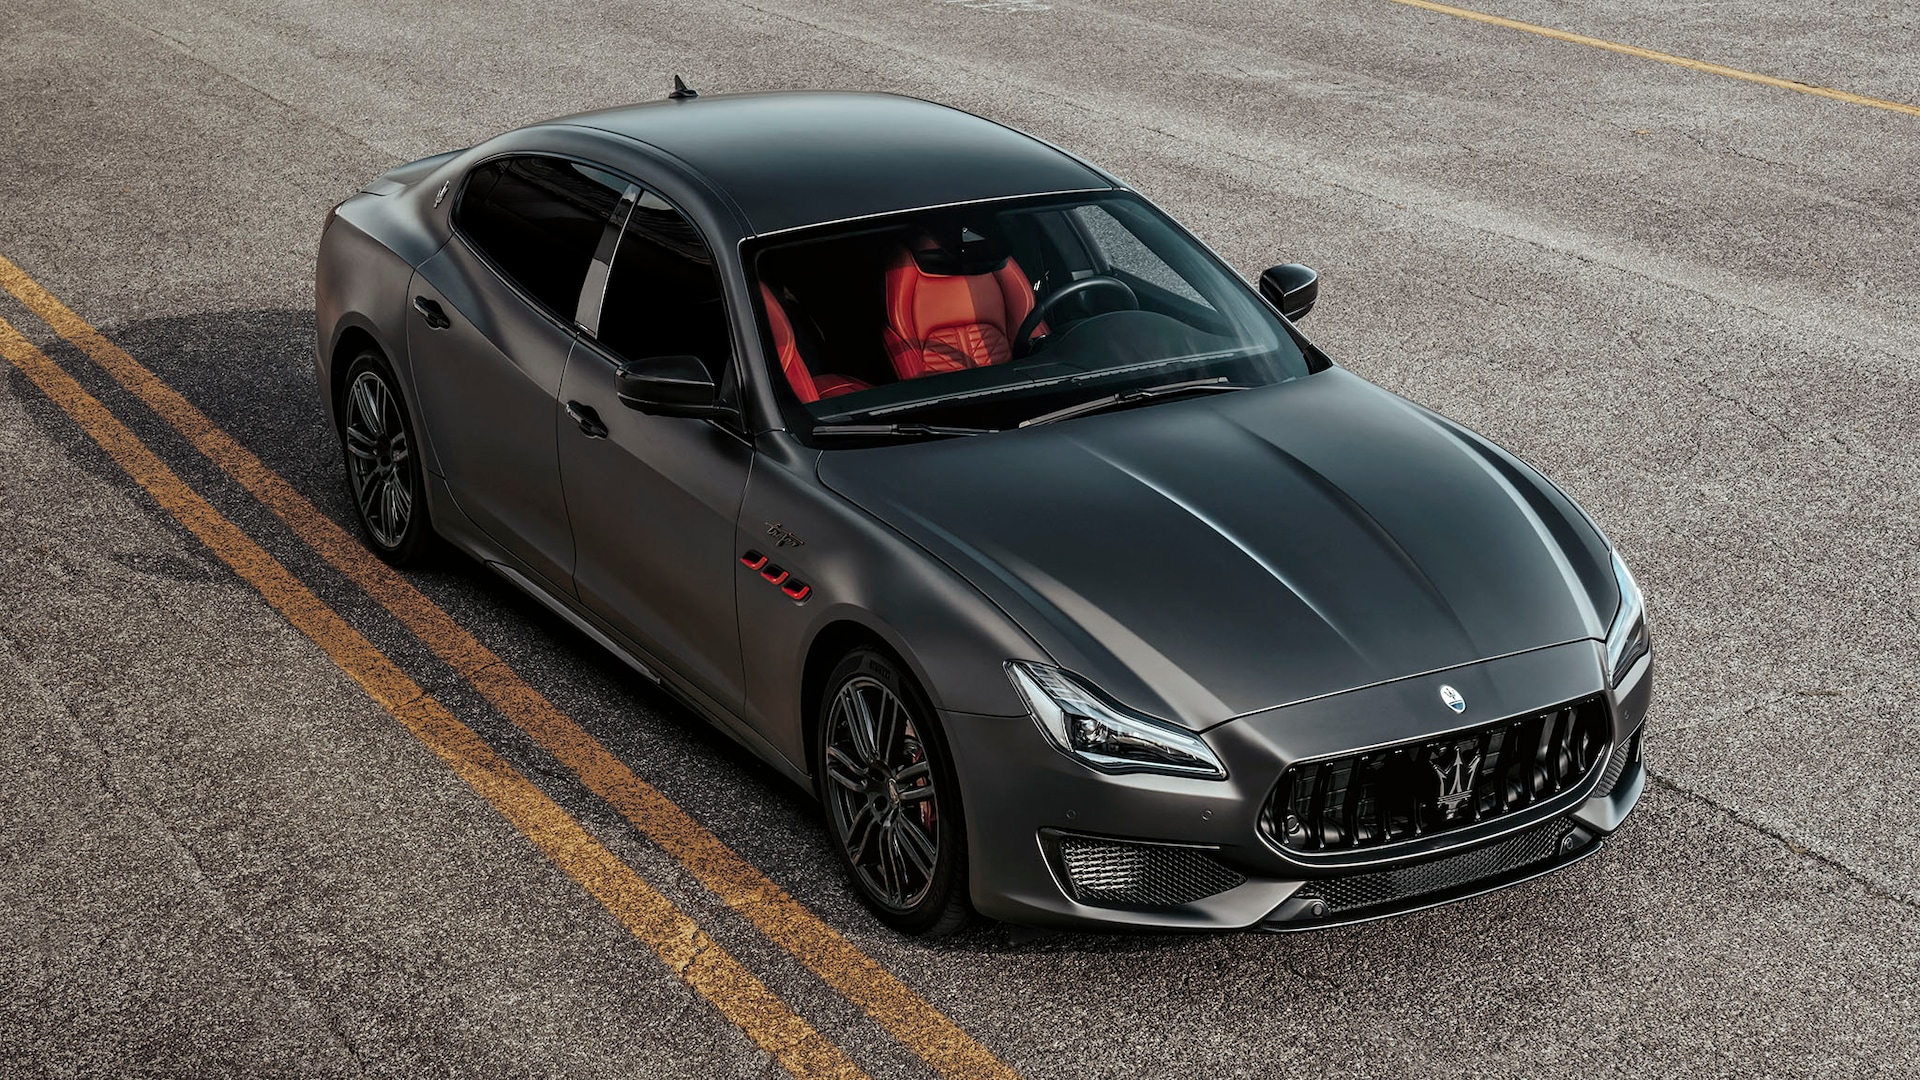 2023 Maserati Quattroporte Prices, Reviews, and Photos - MotorTrend